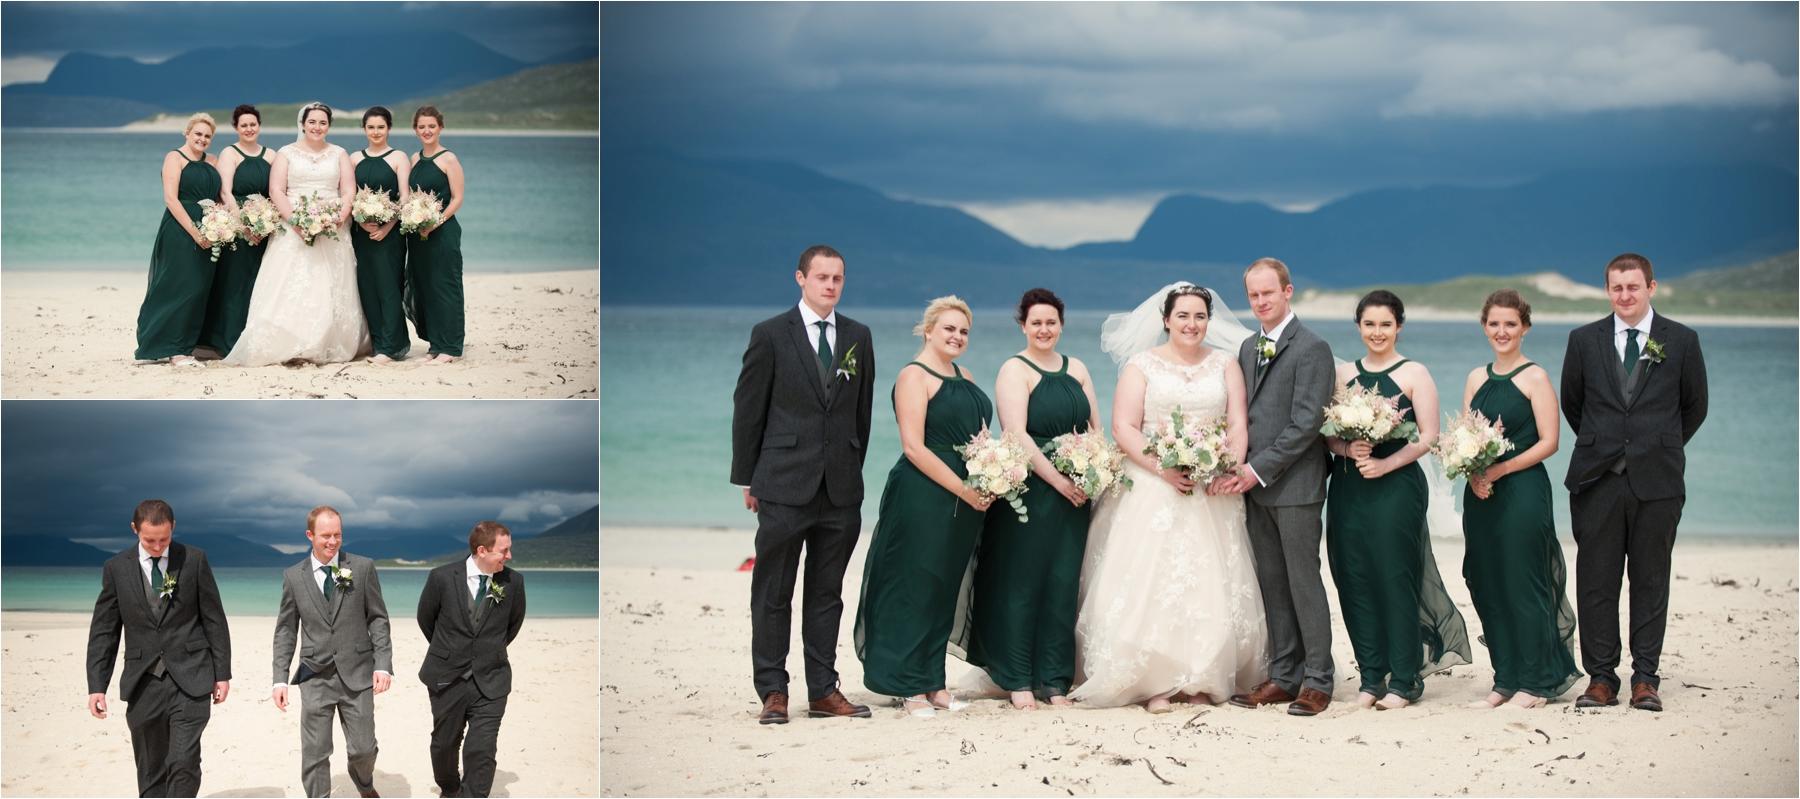 Formal wedding photographs of Lauren, Michael and their wedding party against the green and blue of the waves at Horgabost Beach on the Isle of Harris. The bridesmaids are in emerald green, full-length dresses and the men are in suits. 